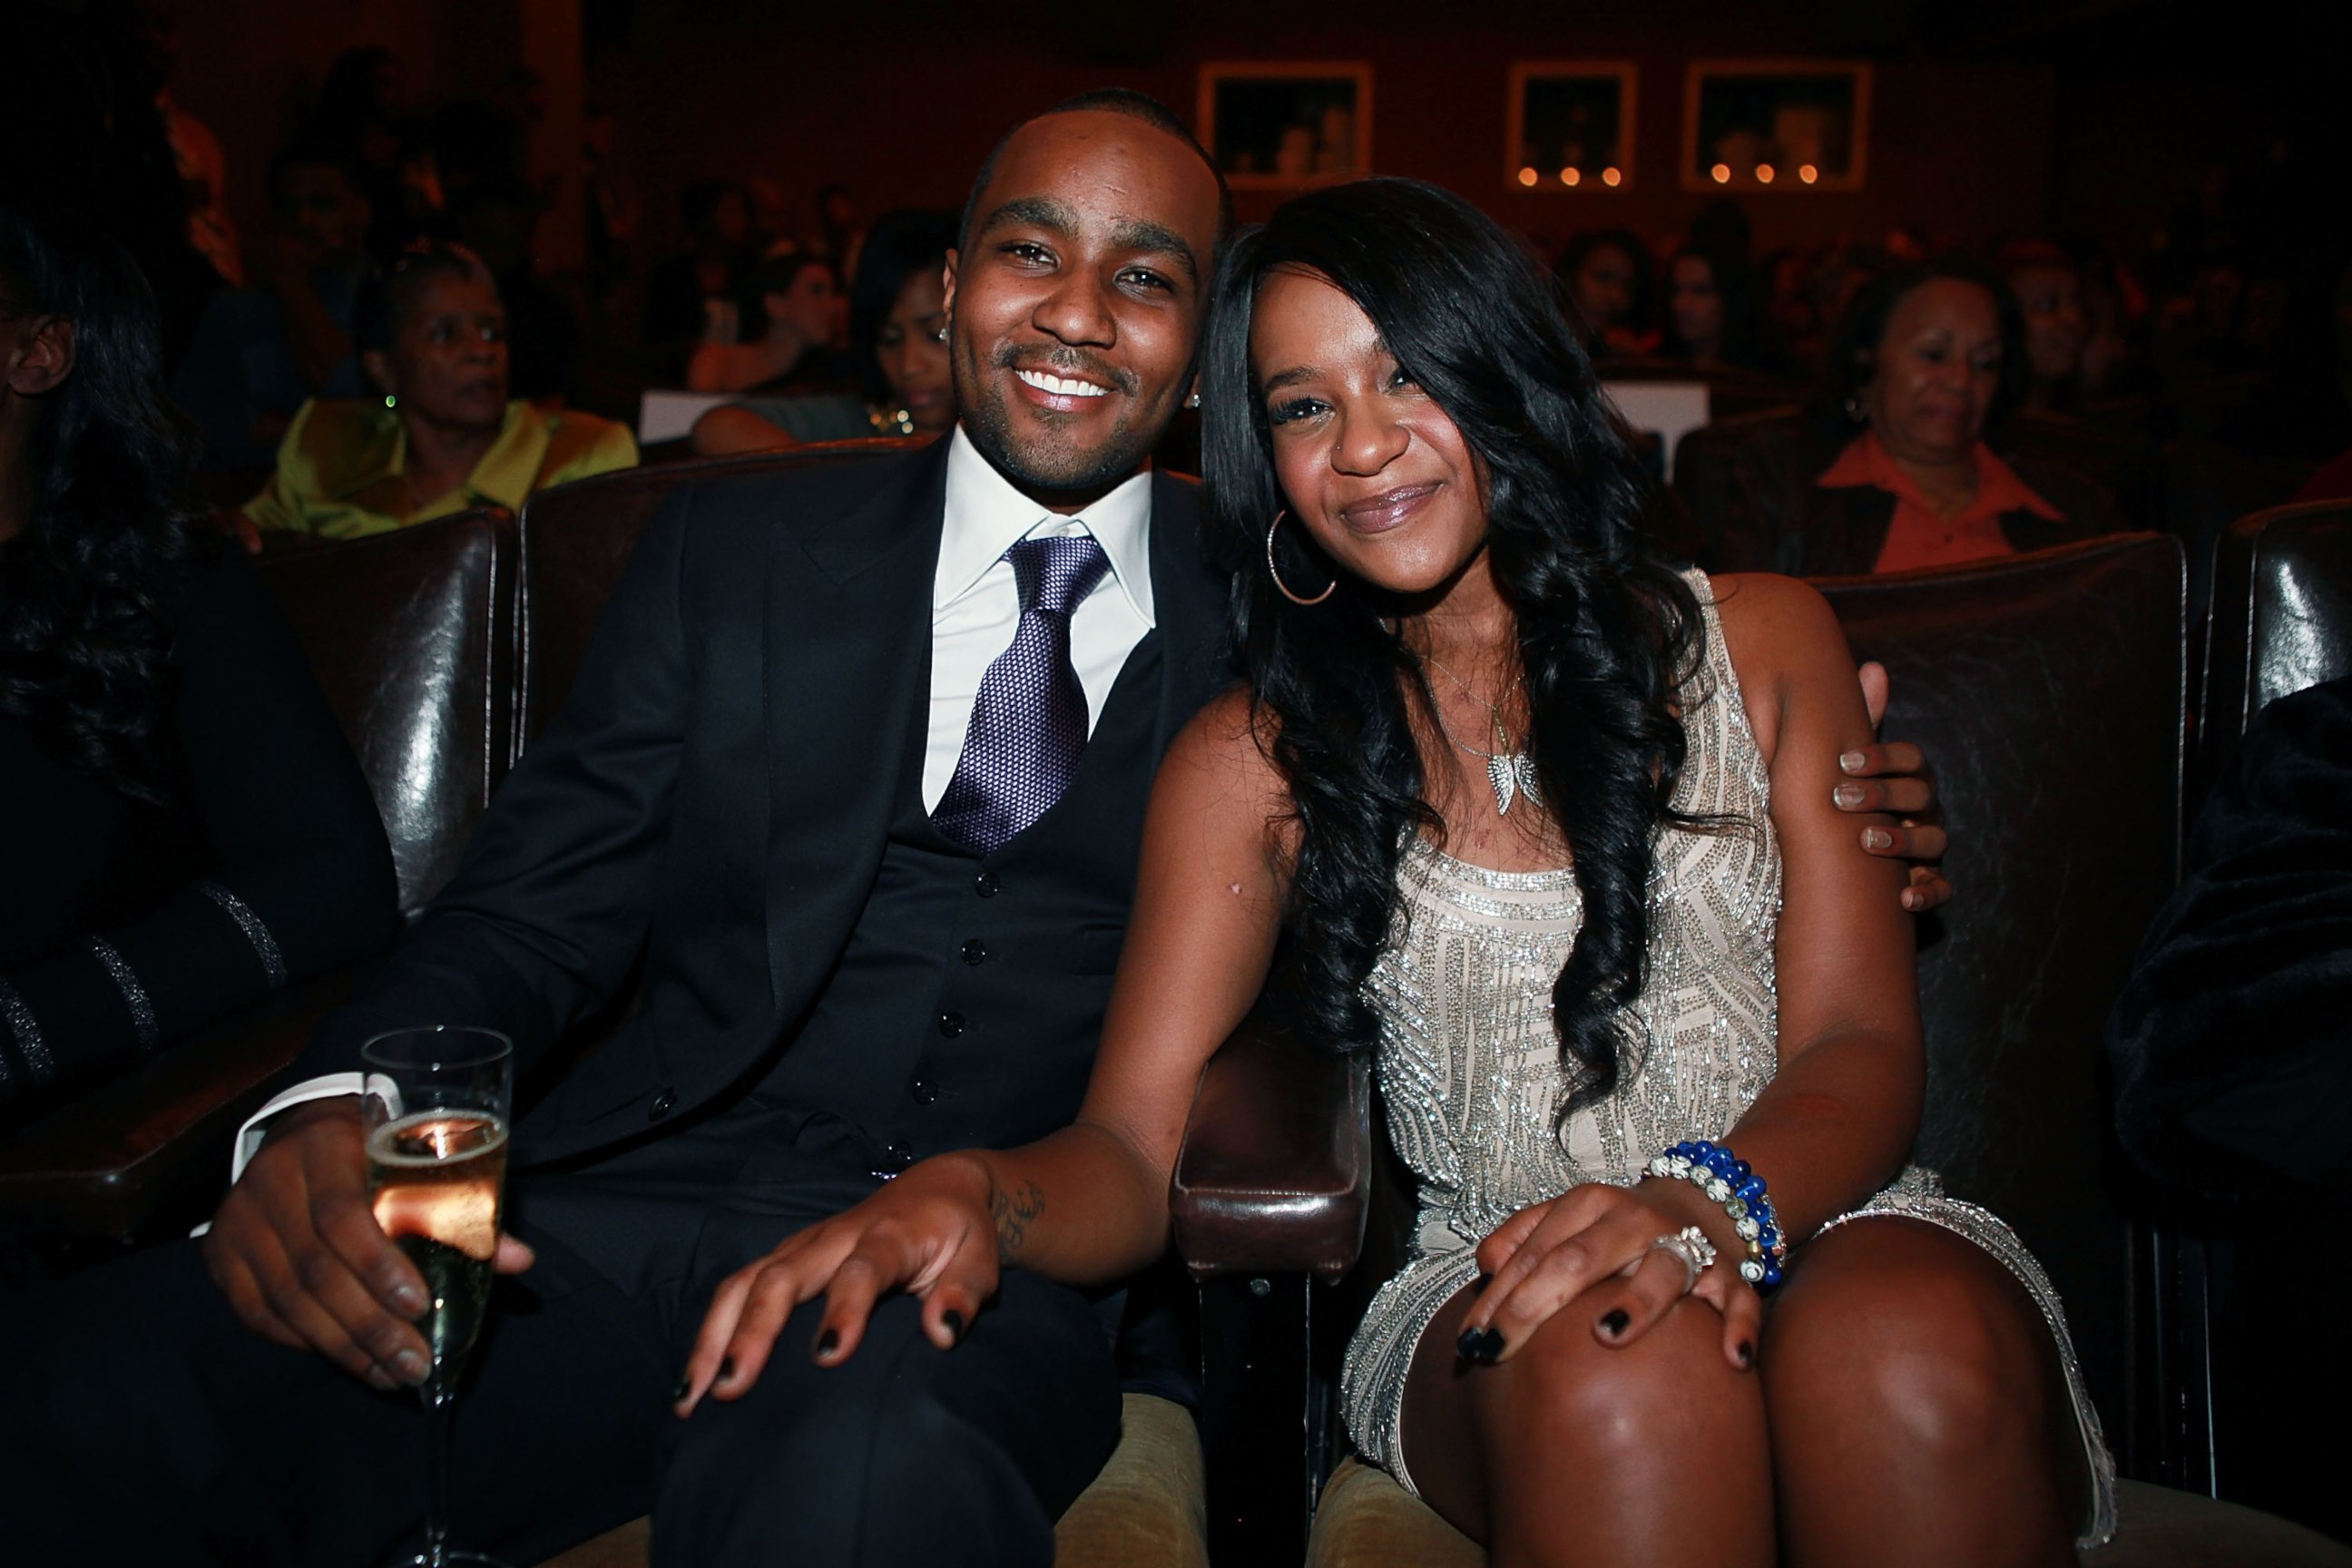 PHOTO: In this file photo, Nick Gordon, left, and Bobbi Kristina Brown, right, attend "The Houstons: On Our Own" series premiere party on Oct. 22, 2012 in New York City. 